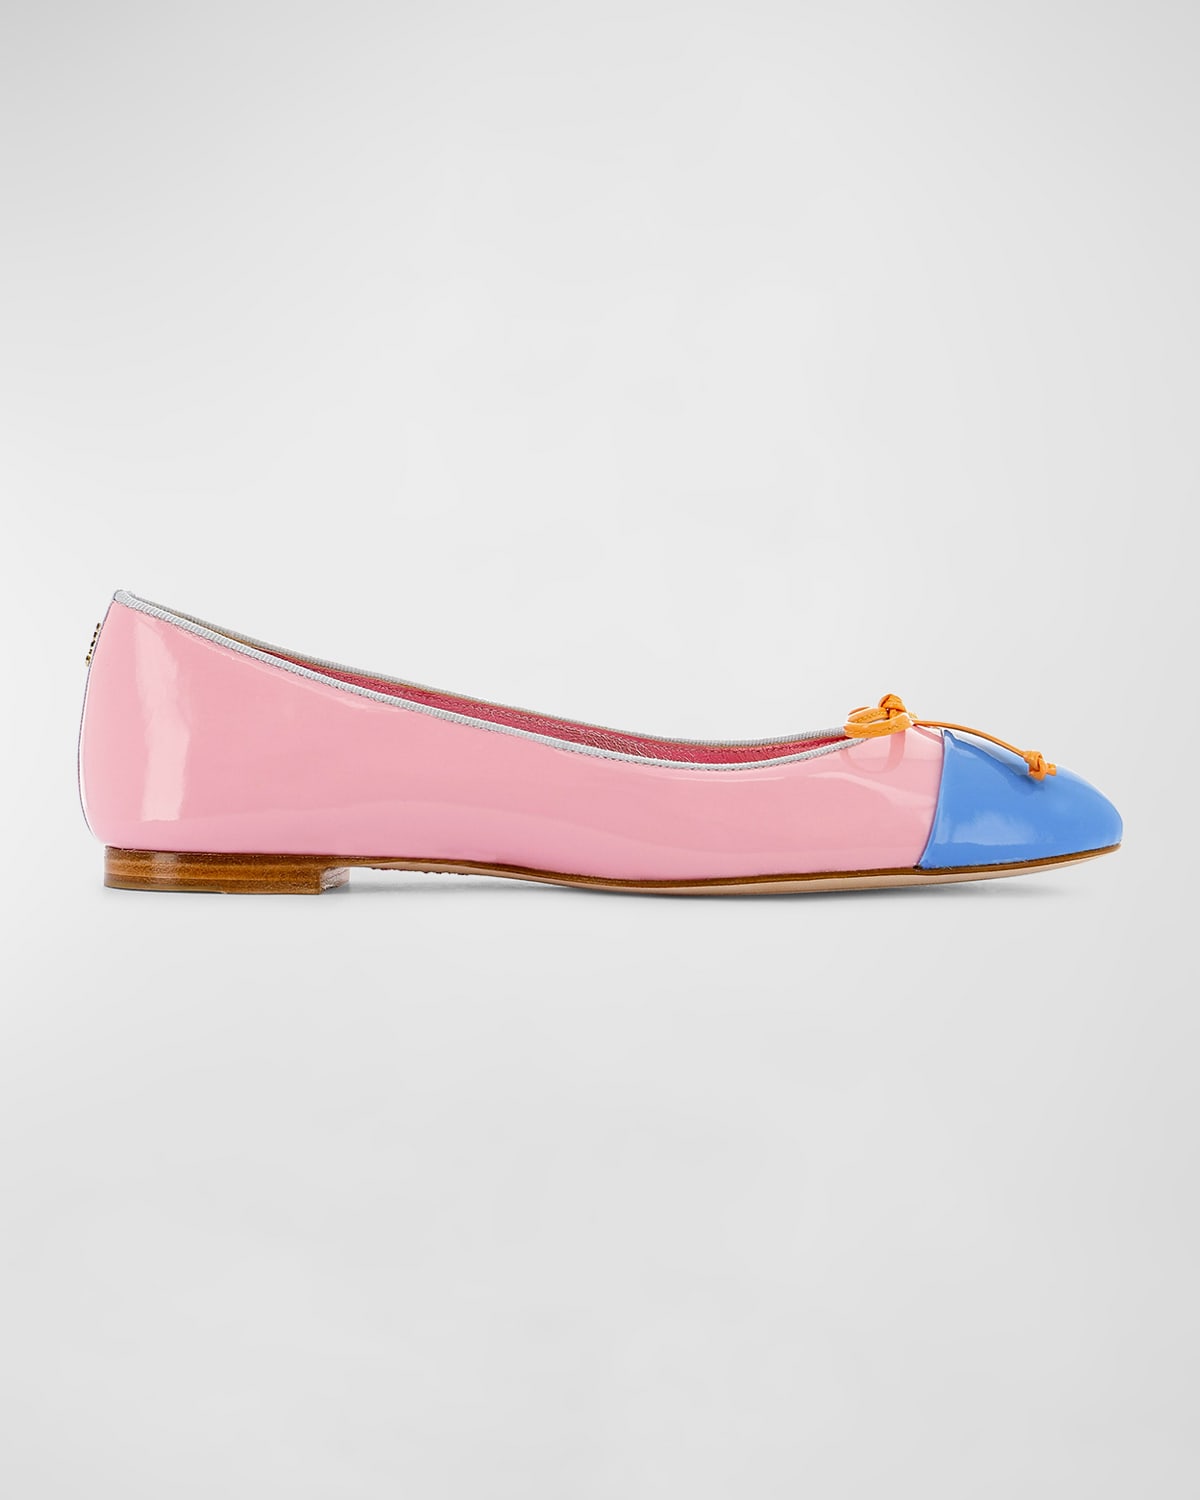 Shop Sophia Webster Pirouette Colorblock Patent Bow Ballerina Flats In Summer